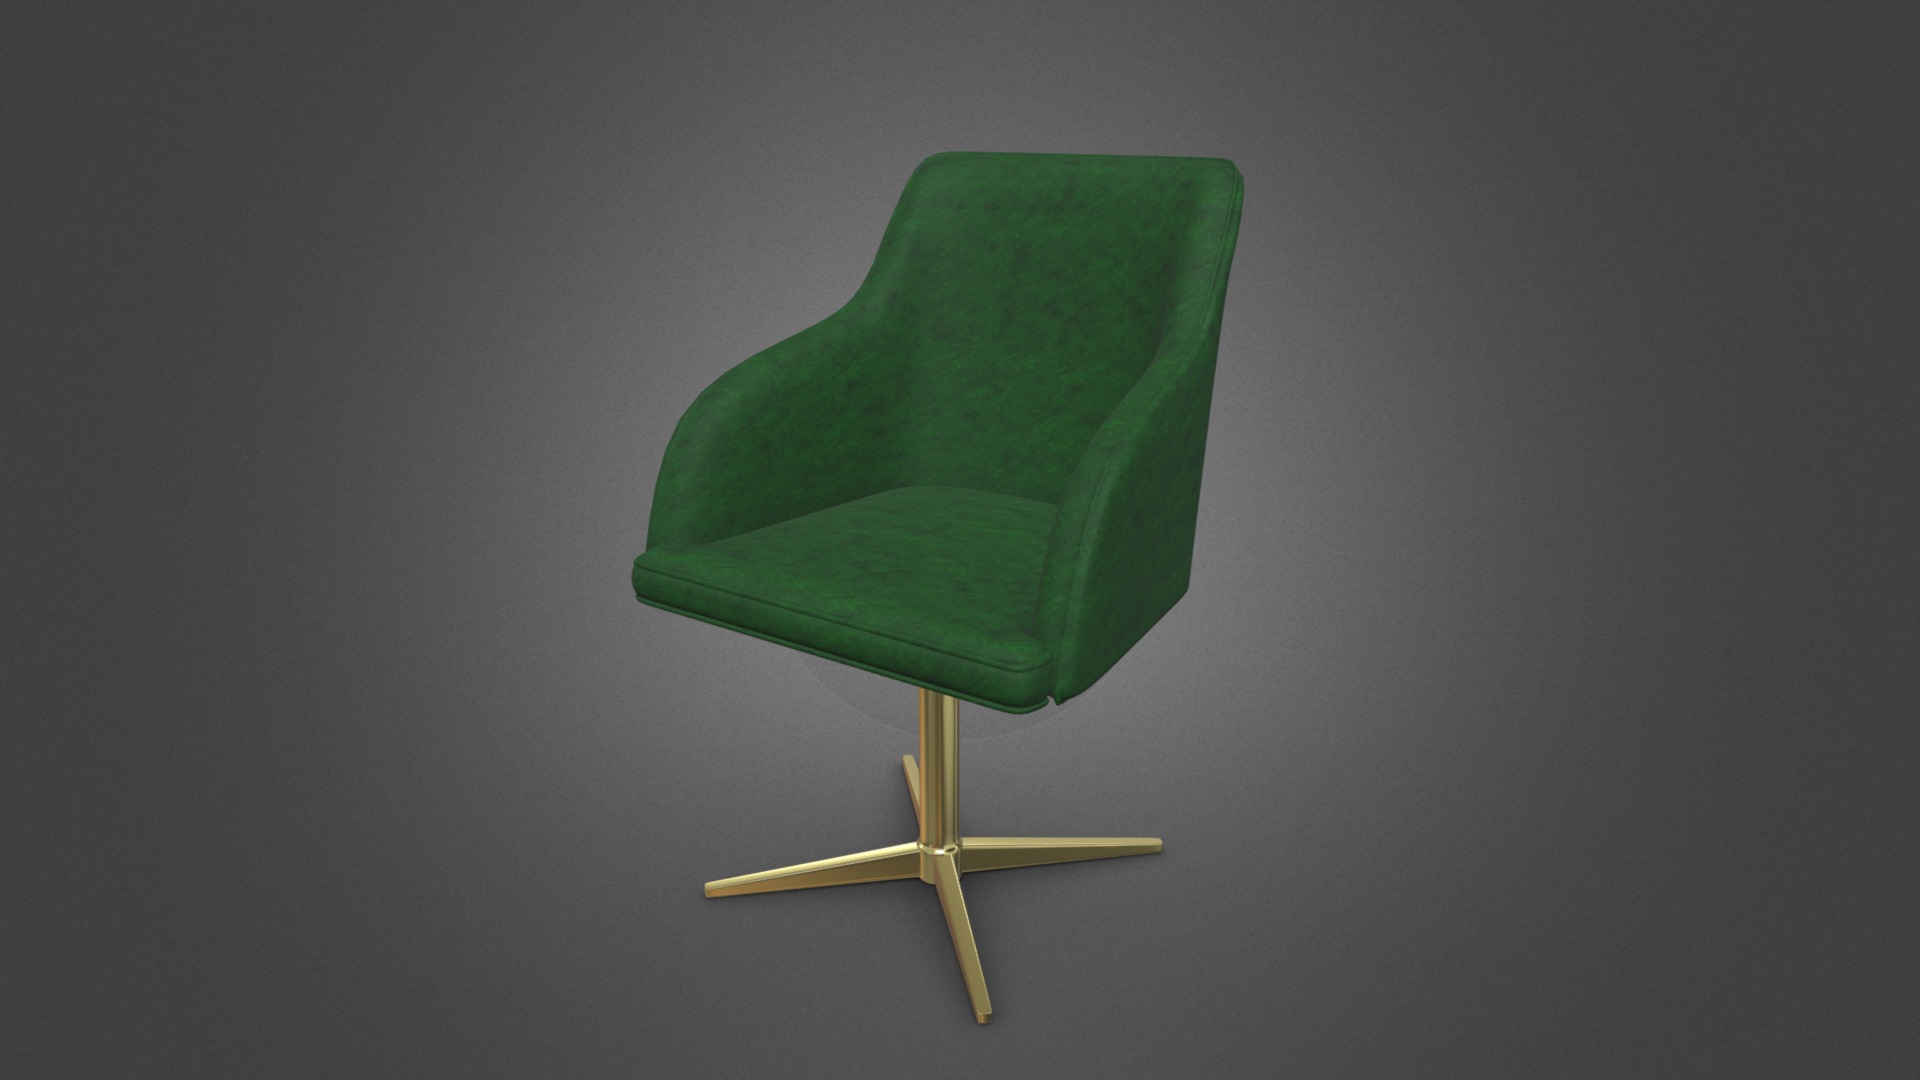 3D model Simple Chair – Keira Office Green Velvet - This is a 3D model of the Simple Chair - Keira Office Green Velvet. The 3D model is about a green square object with a yellow line on it.